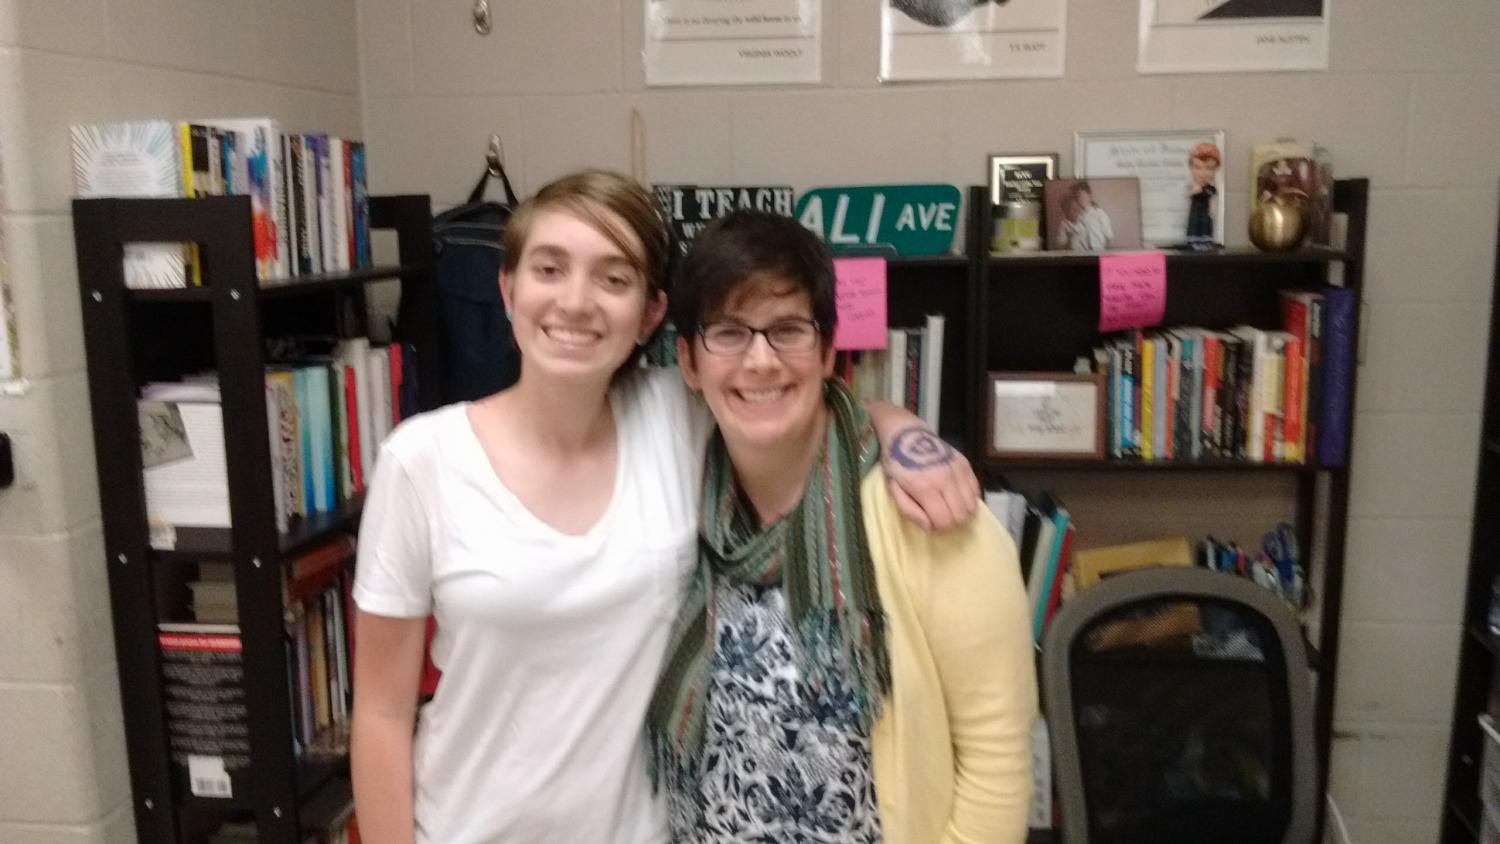 Lizzi Ayers and Mrs. Borger-Germann